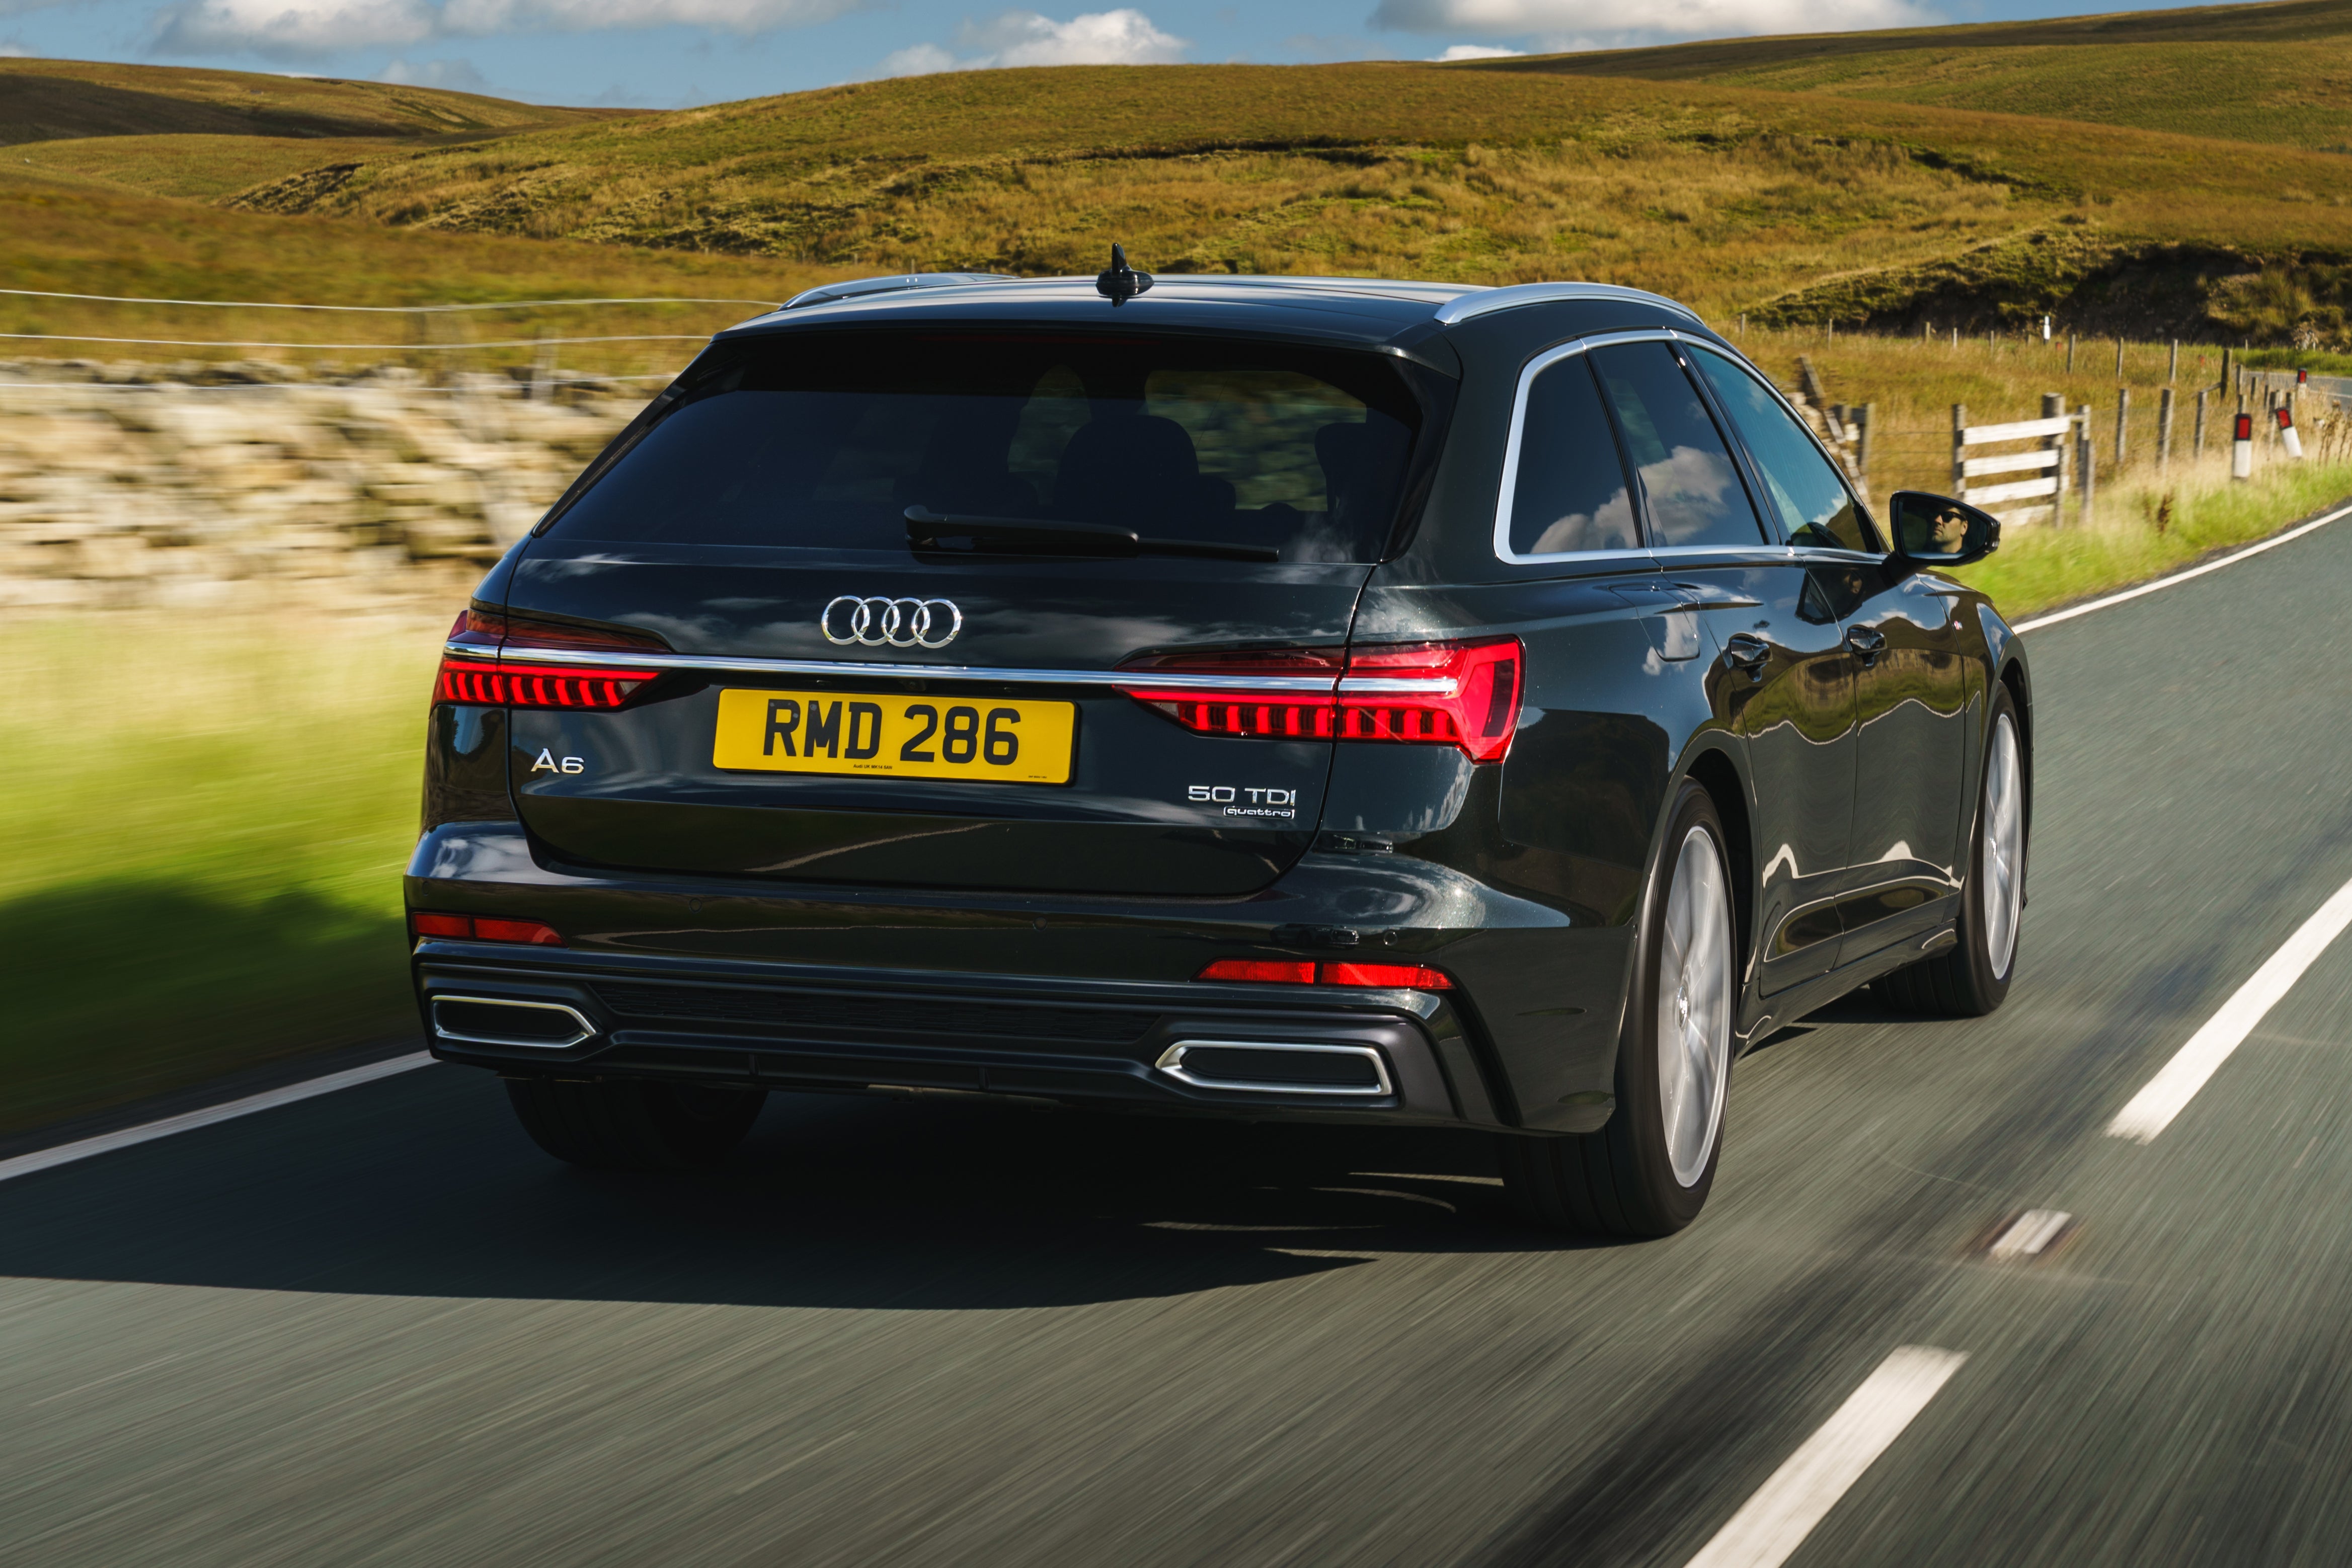  Audi A6 Avant Review 2023: rear three quarter photo of the Audi A6 Avant on the road 